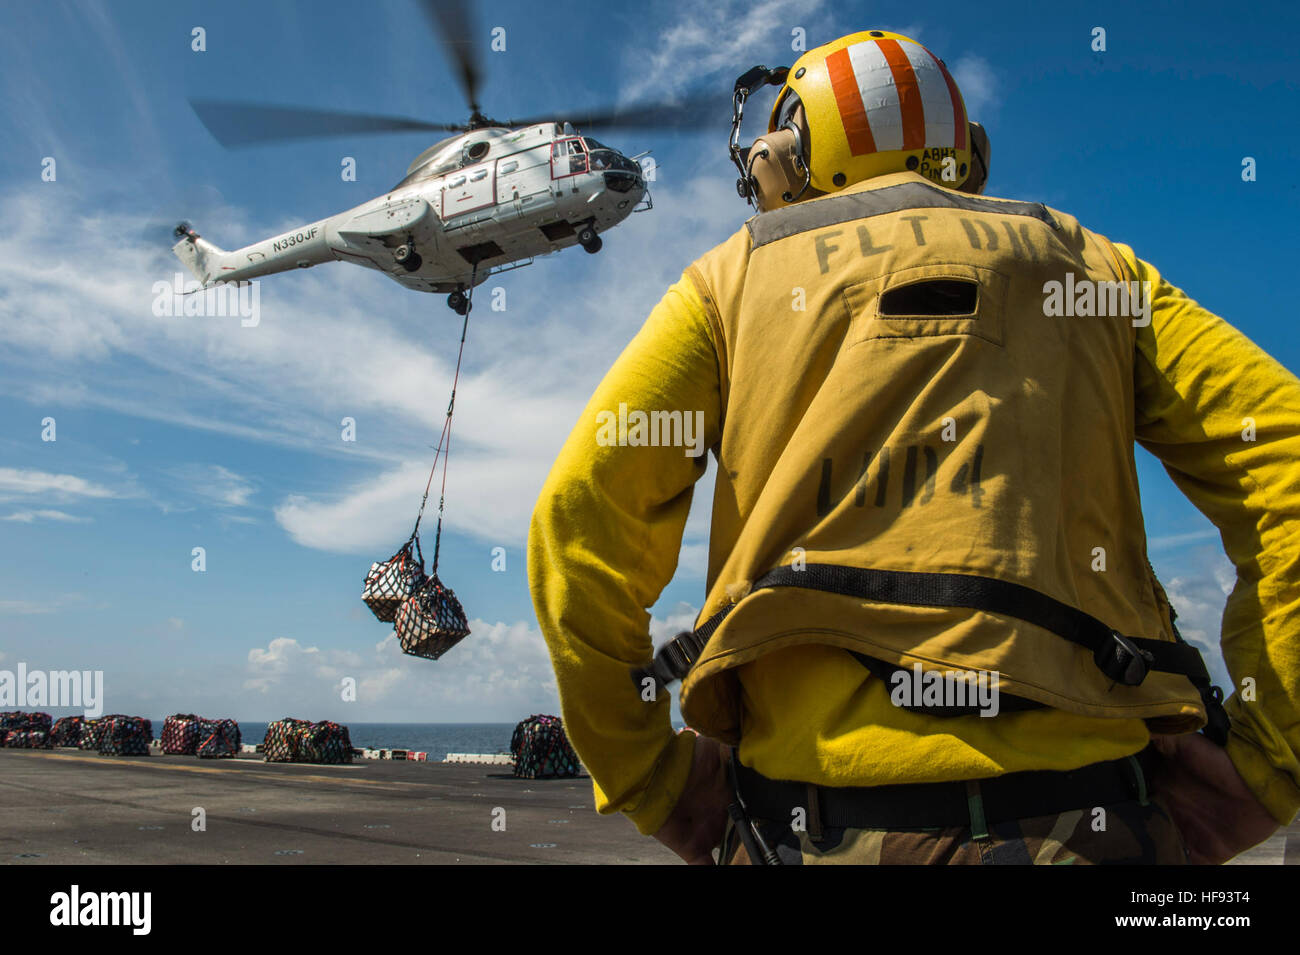 An SA-330 Puma helicopter prepares to place cargo onto the flight deck of the amphibious assault ship USS Boxer (LHD 4) during a vertical replenishment. Boxer is the flagship for the Boxer Amphibious Ready Group and, with the embarked 13th Marine Expeditionary Unit, is deployed in support of maritime security operations and theater security cooperation efforts in the U.S. 5th Fleet area of responsibility. (U.S. Navy photo by Mass Communication Specialist 2nd Class Kenan O'Connor/Released) Boxer VERTREP 131014-N-JP249-097 Stock Photo